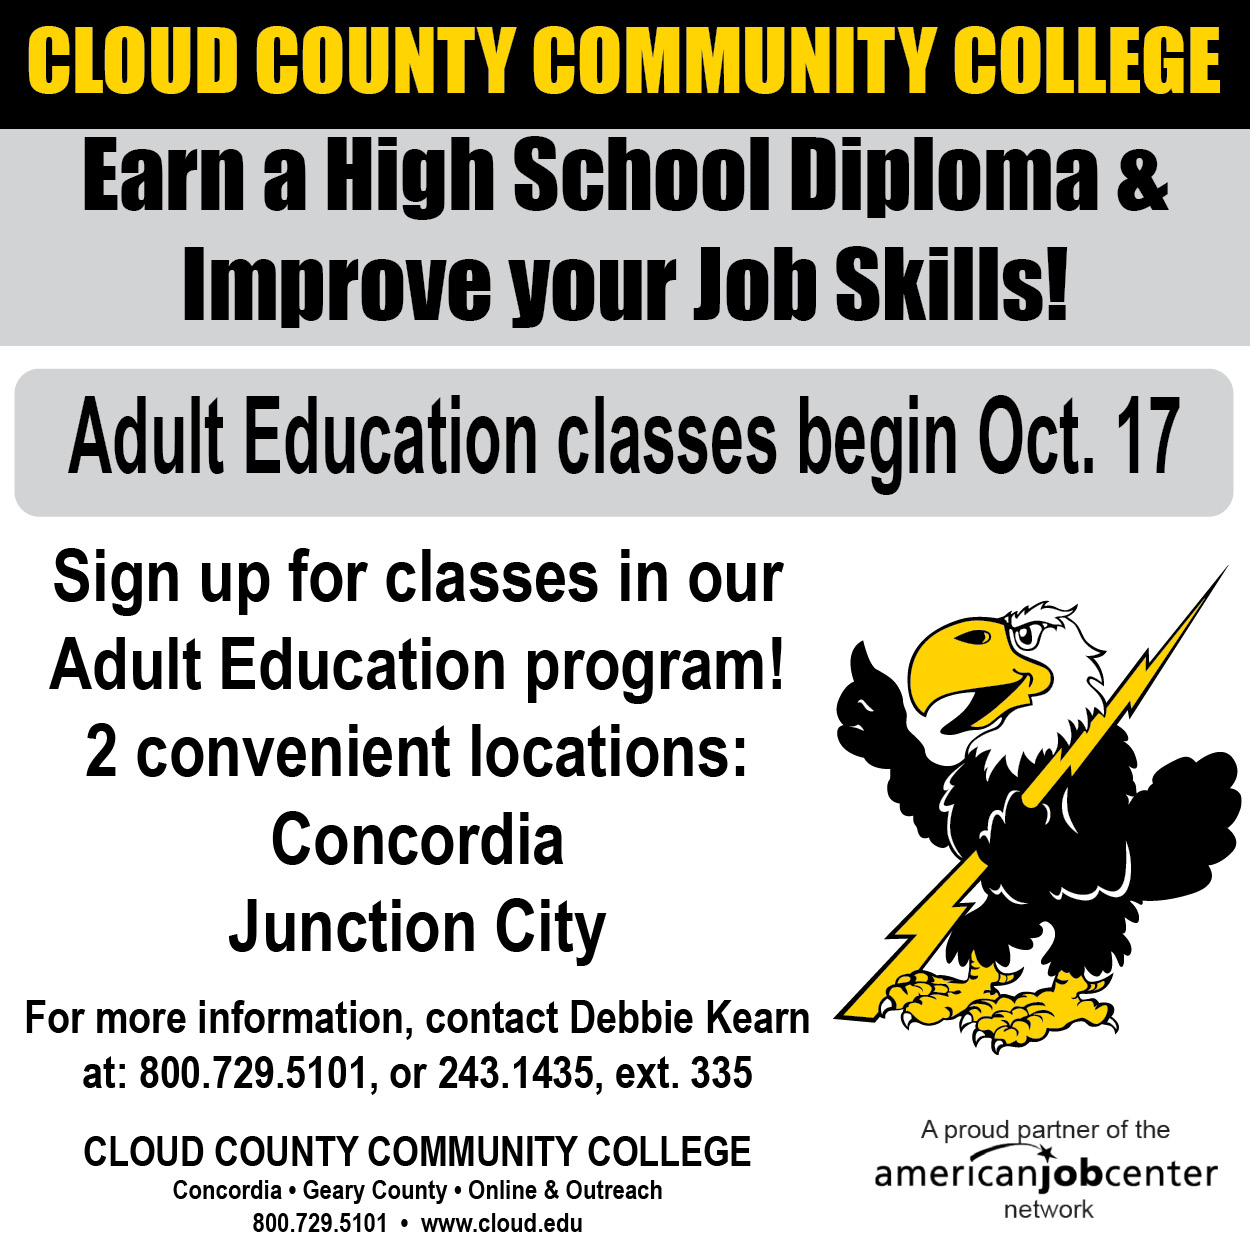 Courses to be offered in the Adult Education program.